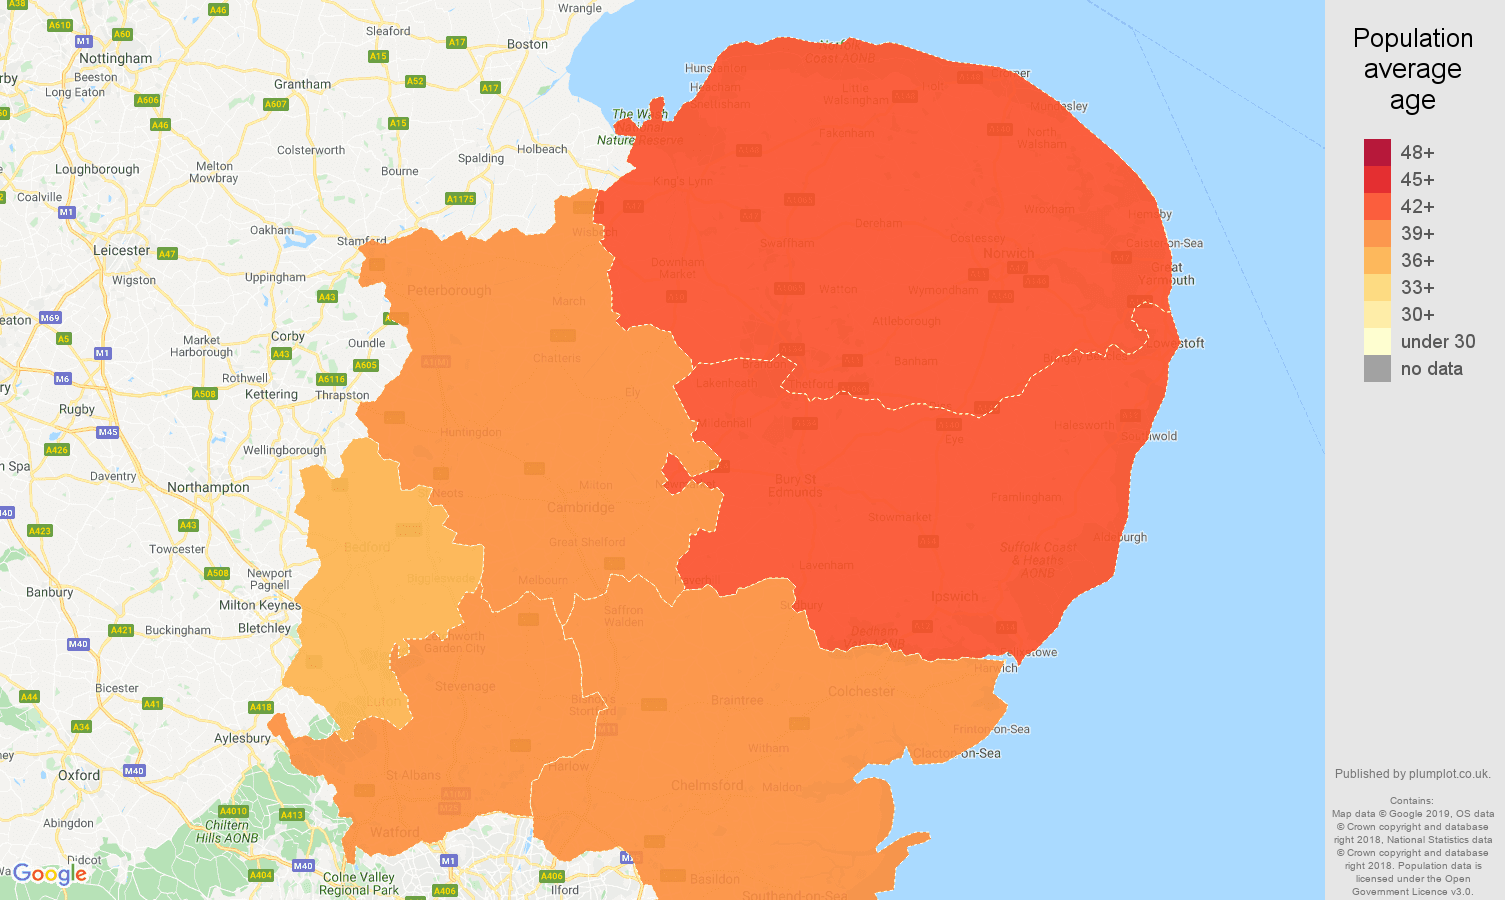 East of England population average age map